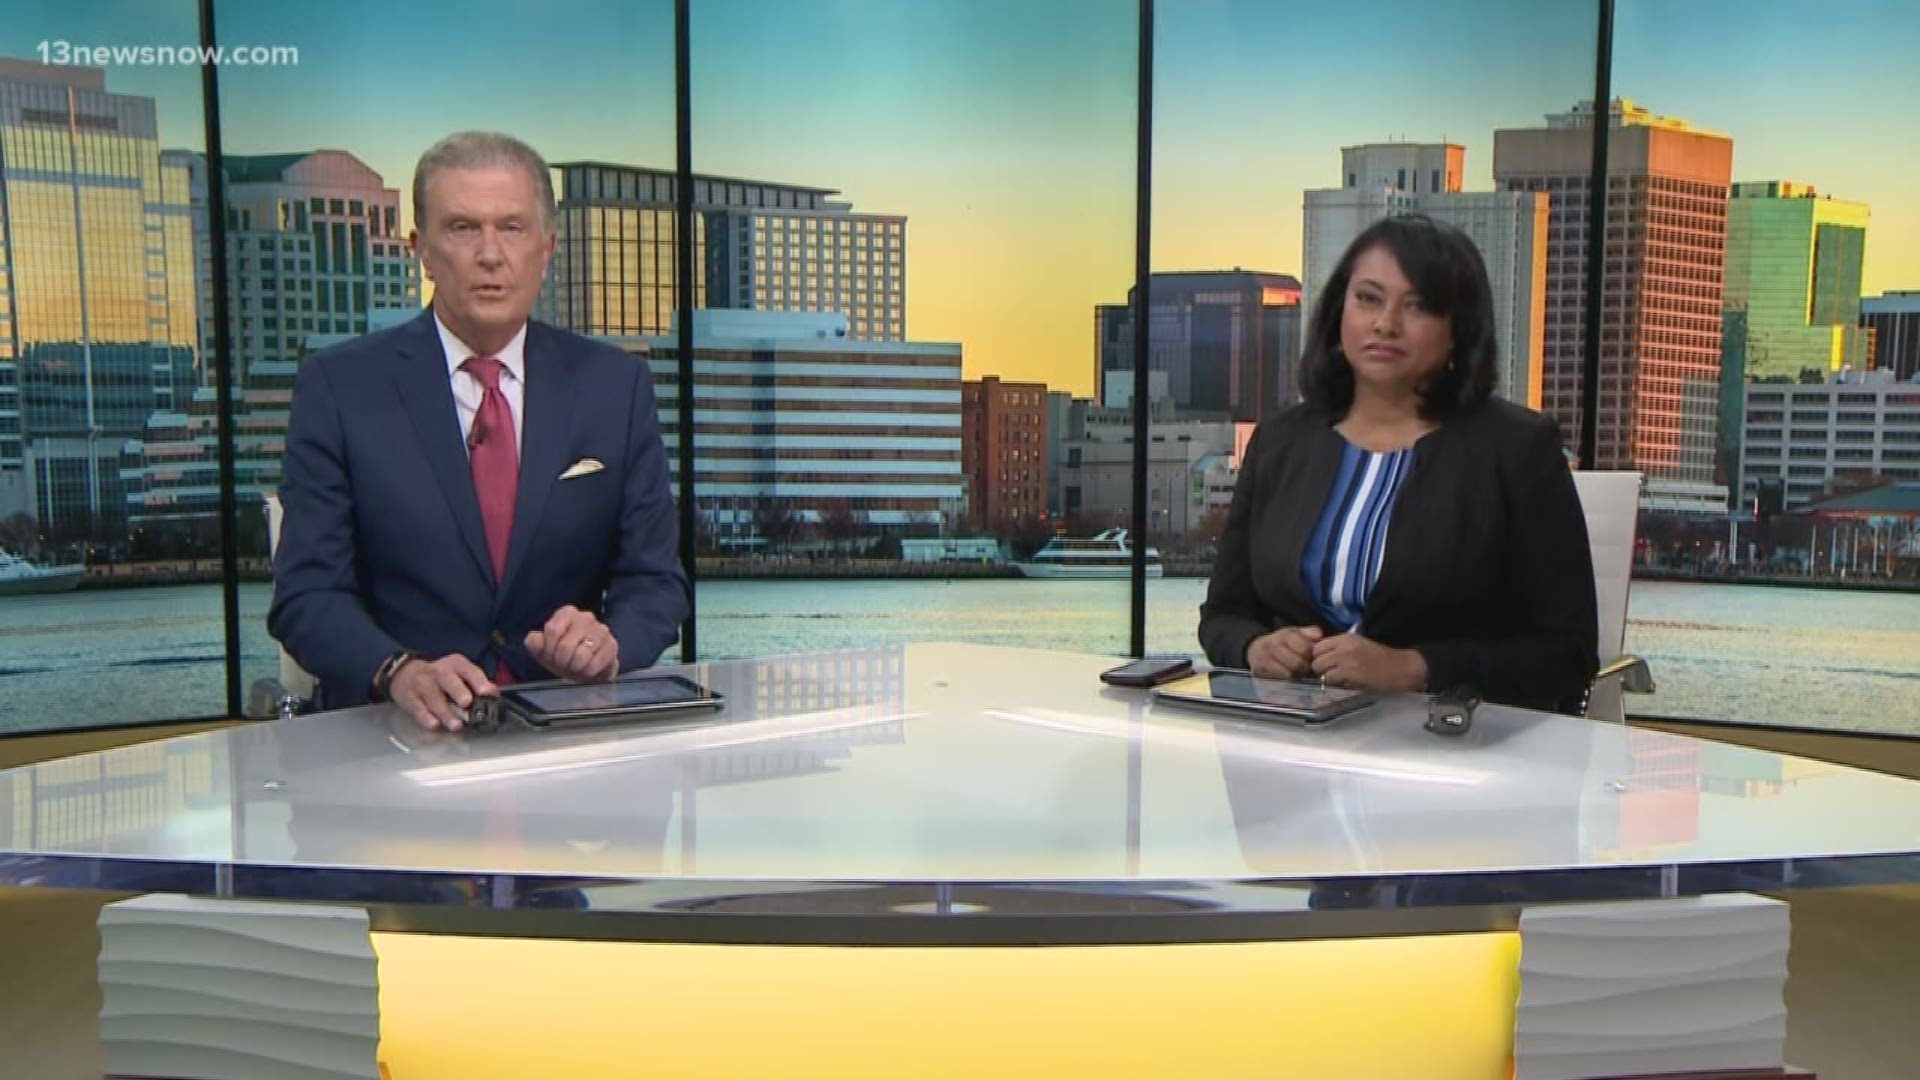 13News Now top headlines at 6 p.m. with David Alan and Janet Roach for January 23.